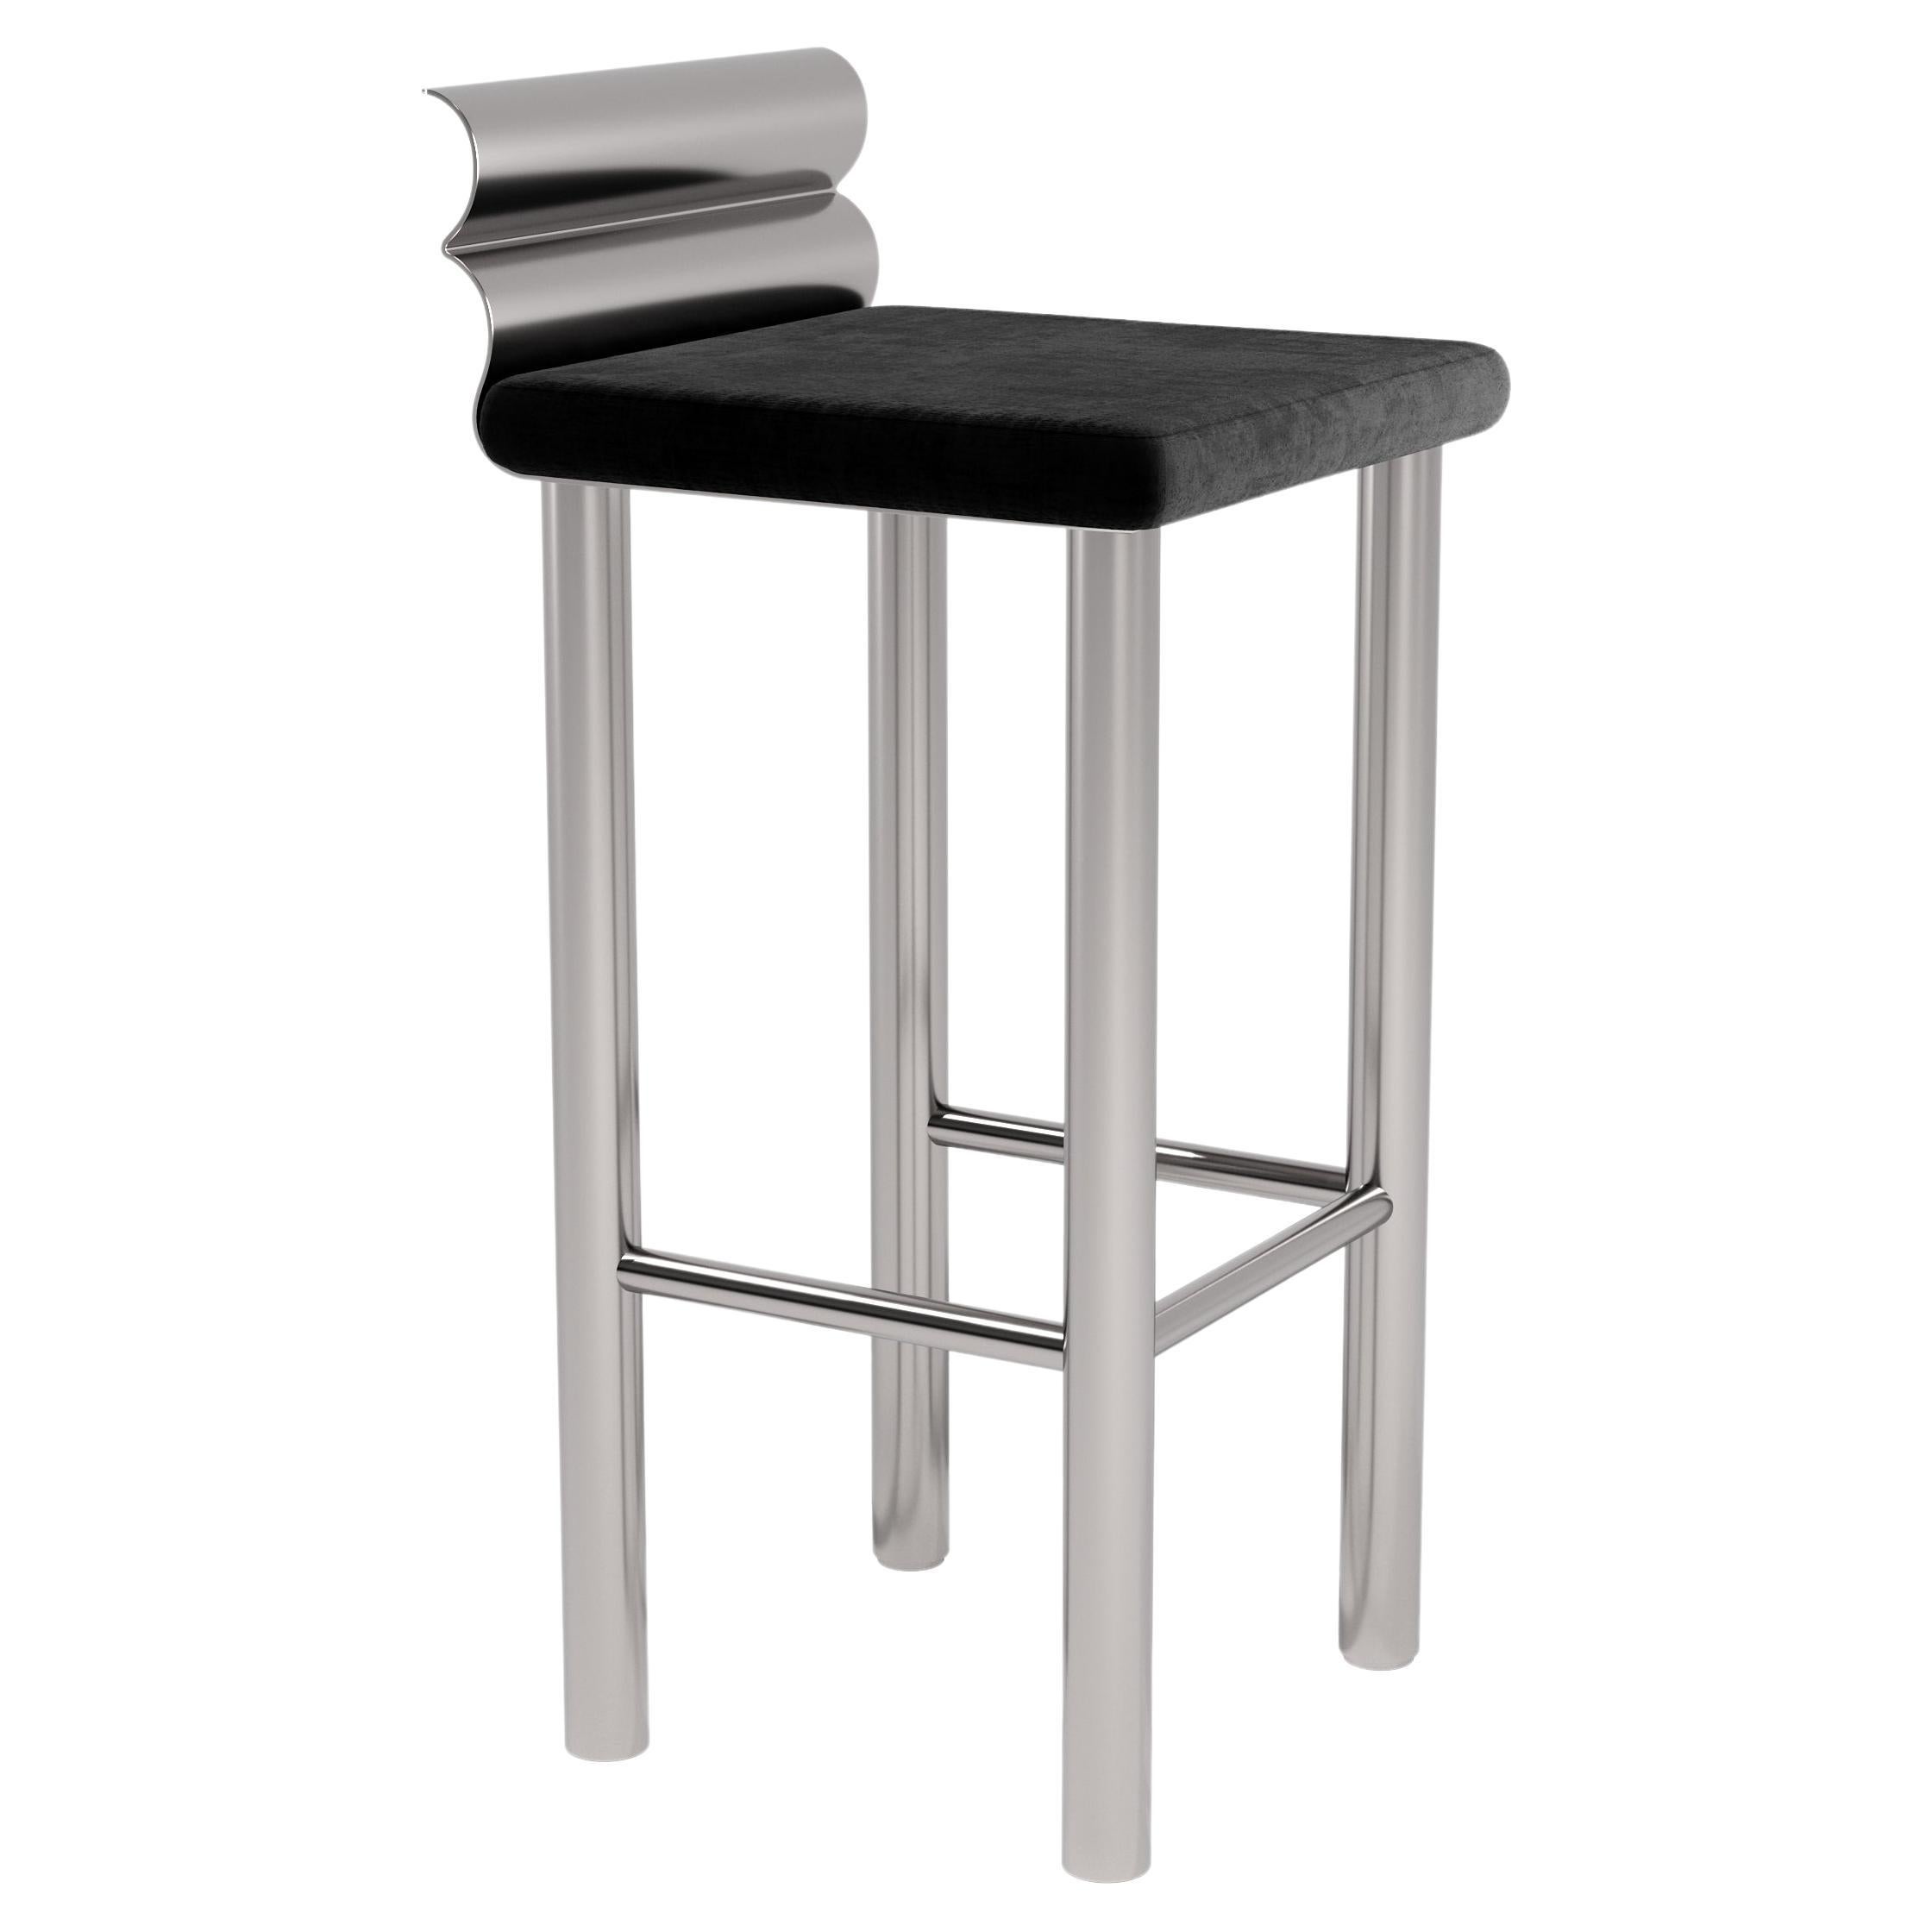 Modern Counter Stool Mount S1 Stainless Steel with Textile Seat by Dali Home For Sale